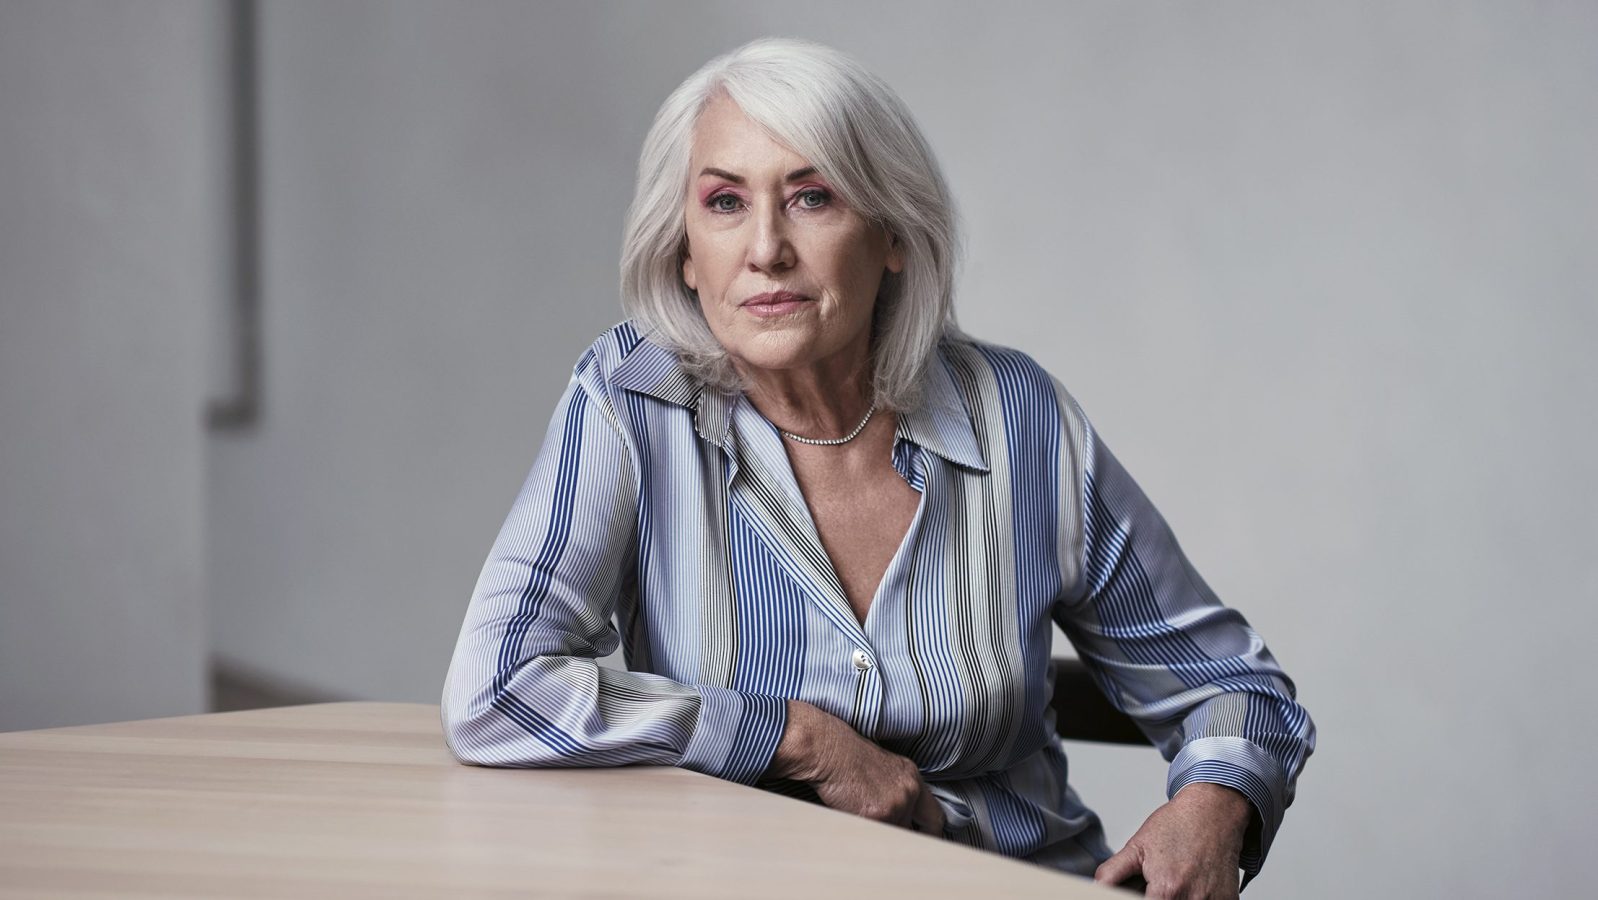 Judith Neilson wears a blue blouse. She is pictured sitting at a table with one hand resting on it and the other on her hip. She is looking at the camera and her hair is down.